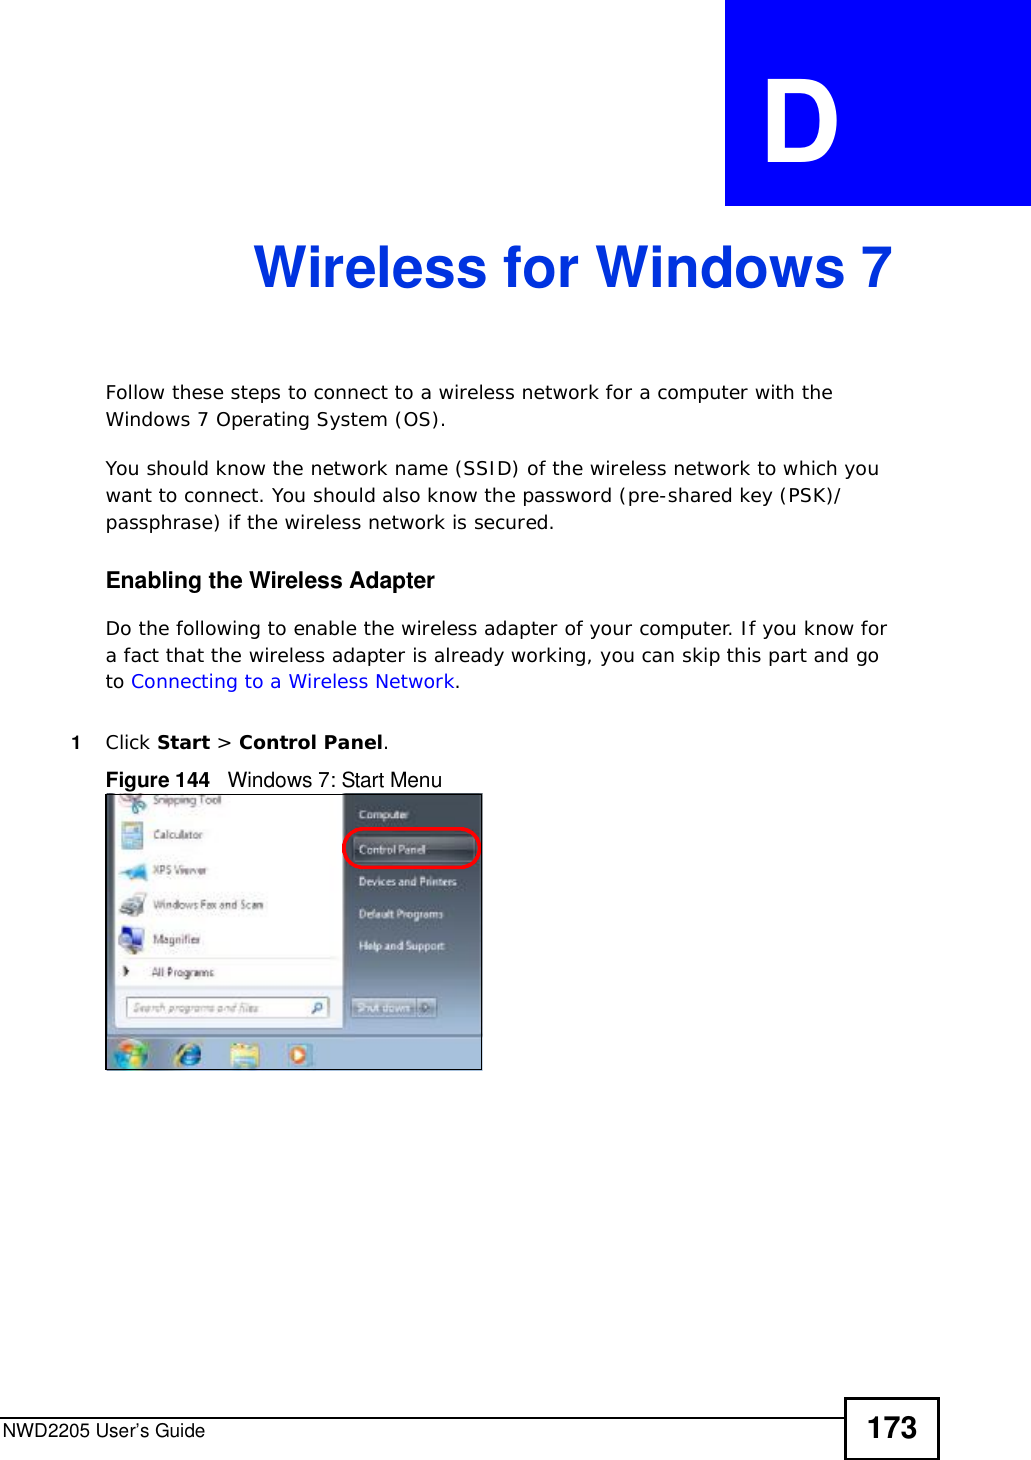 NWD2205 User’s Guide 173APPENDIX  D Wireless for Windows 7Follow these steps to connect to a wireless network for a computer with the Windows 7 Operating System (OS).You should know the network name (SSID) of the wireless network to which you want to connect. You should also know the password (pre-shared key (PSK)/passphrase) if the wireless network is secured. Enabling the Wireless AdapterDo the following to enable the wireless adapter of your computer. If you know for a fact that the wireless adapter is already working, you can skip this part and go to Connecting to a Wireless Network.1Click Start &gt; Control Panel.Figure 144   Windows 7: Start Menu